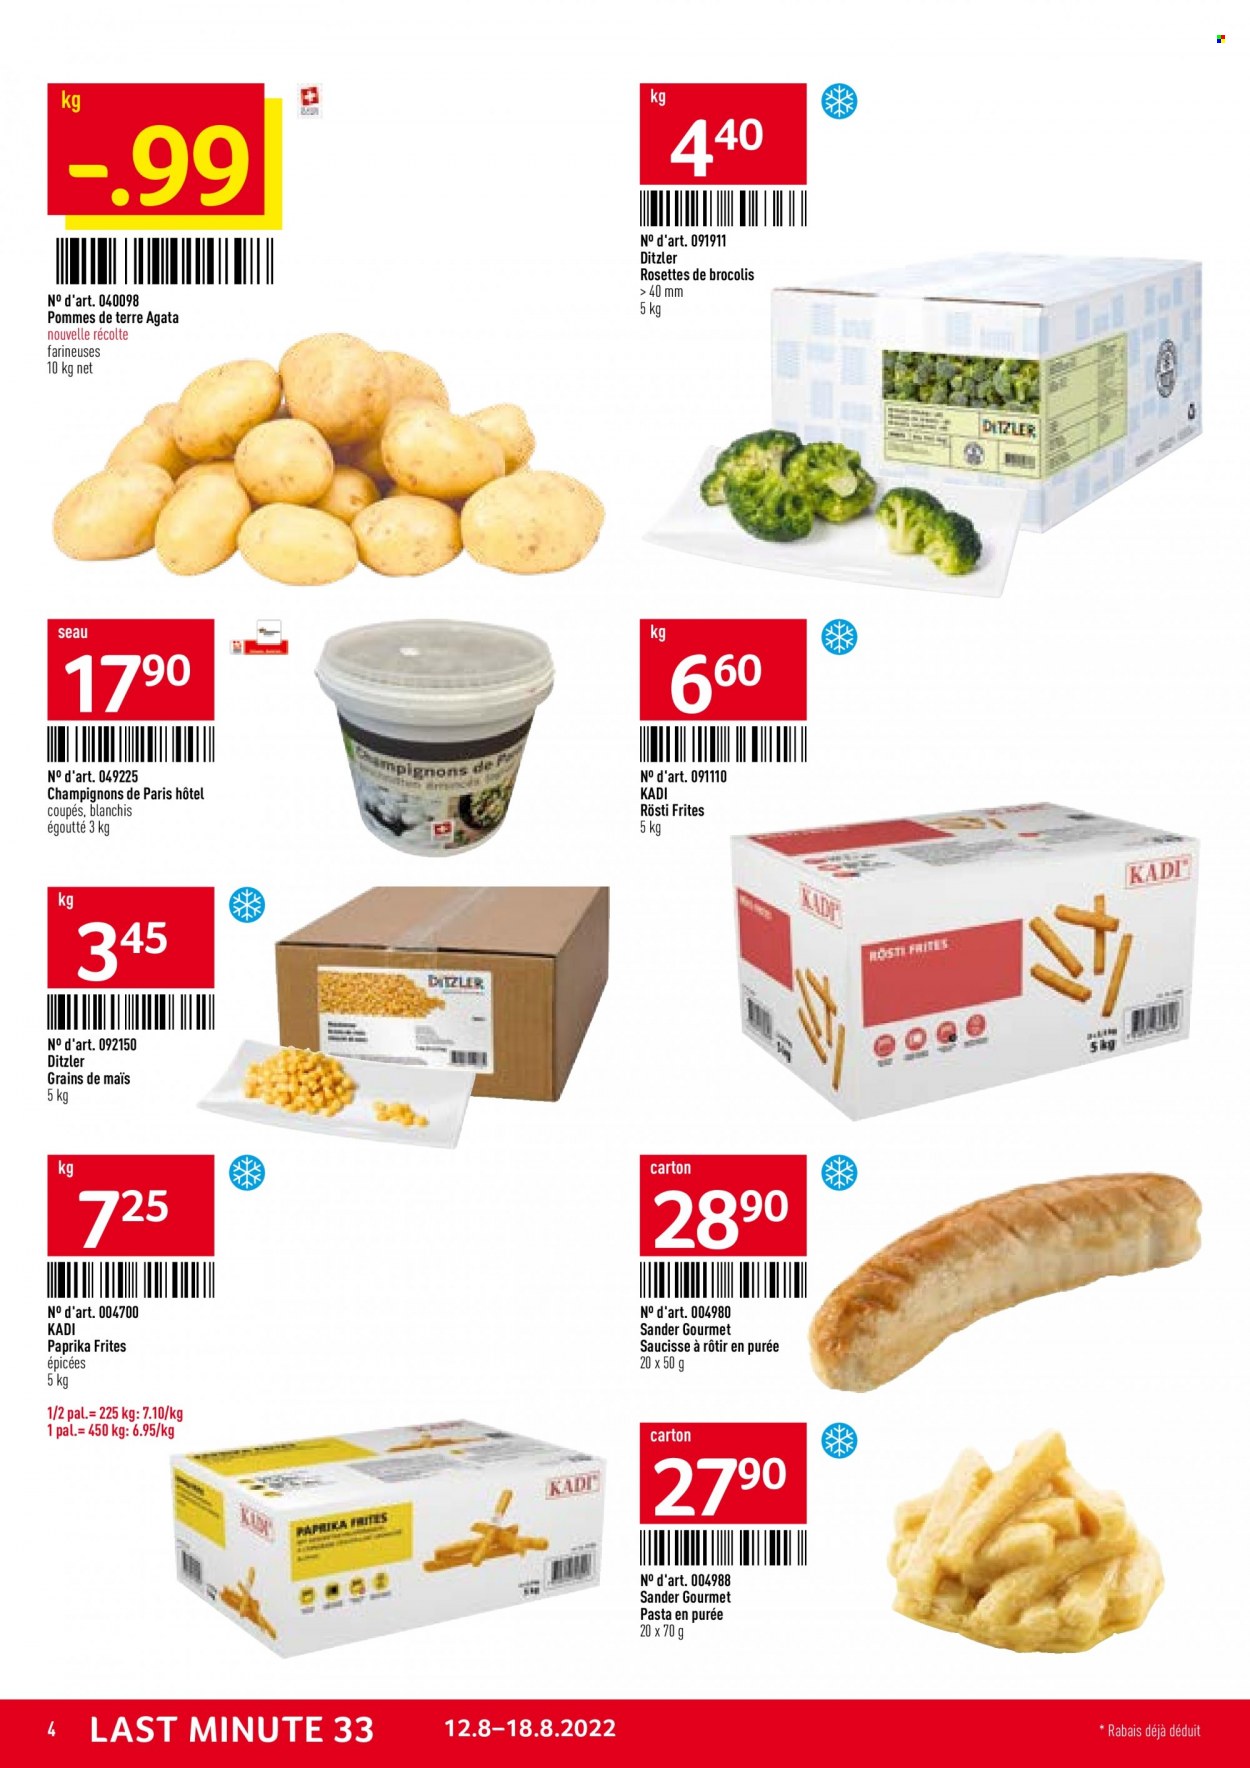 Catalogue TransGourmet - 12.8.2022 - 18.8.2022. Page 4.